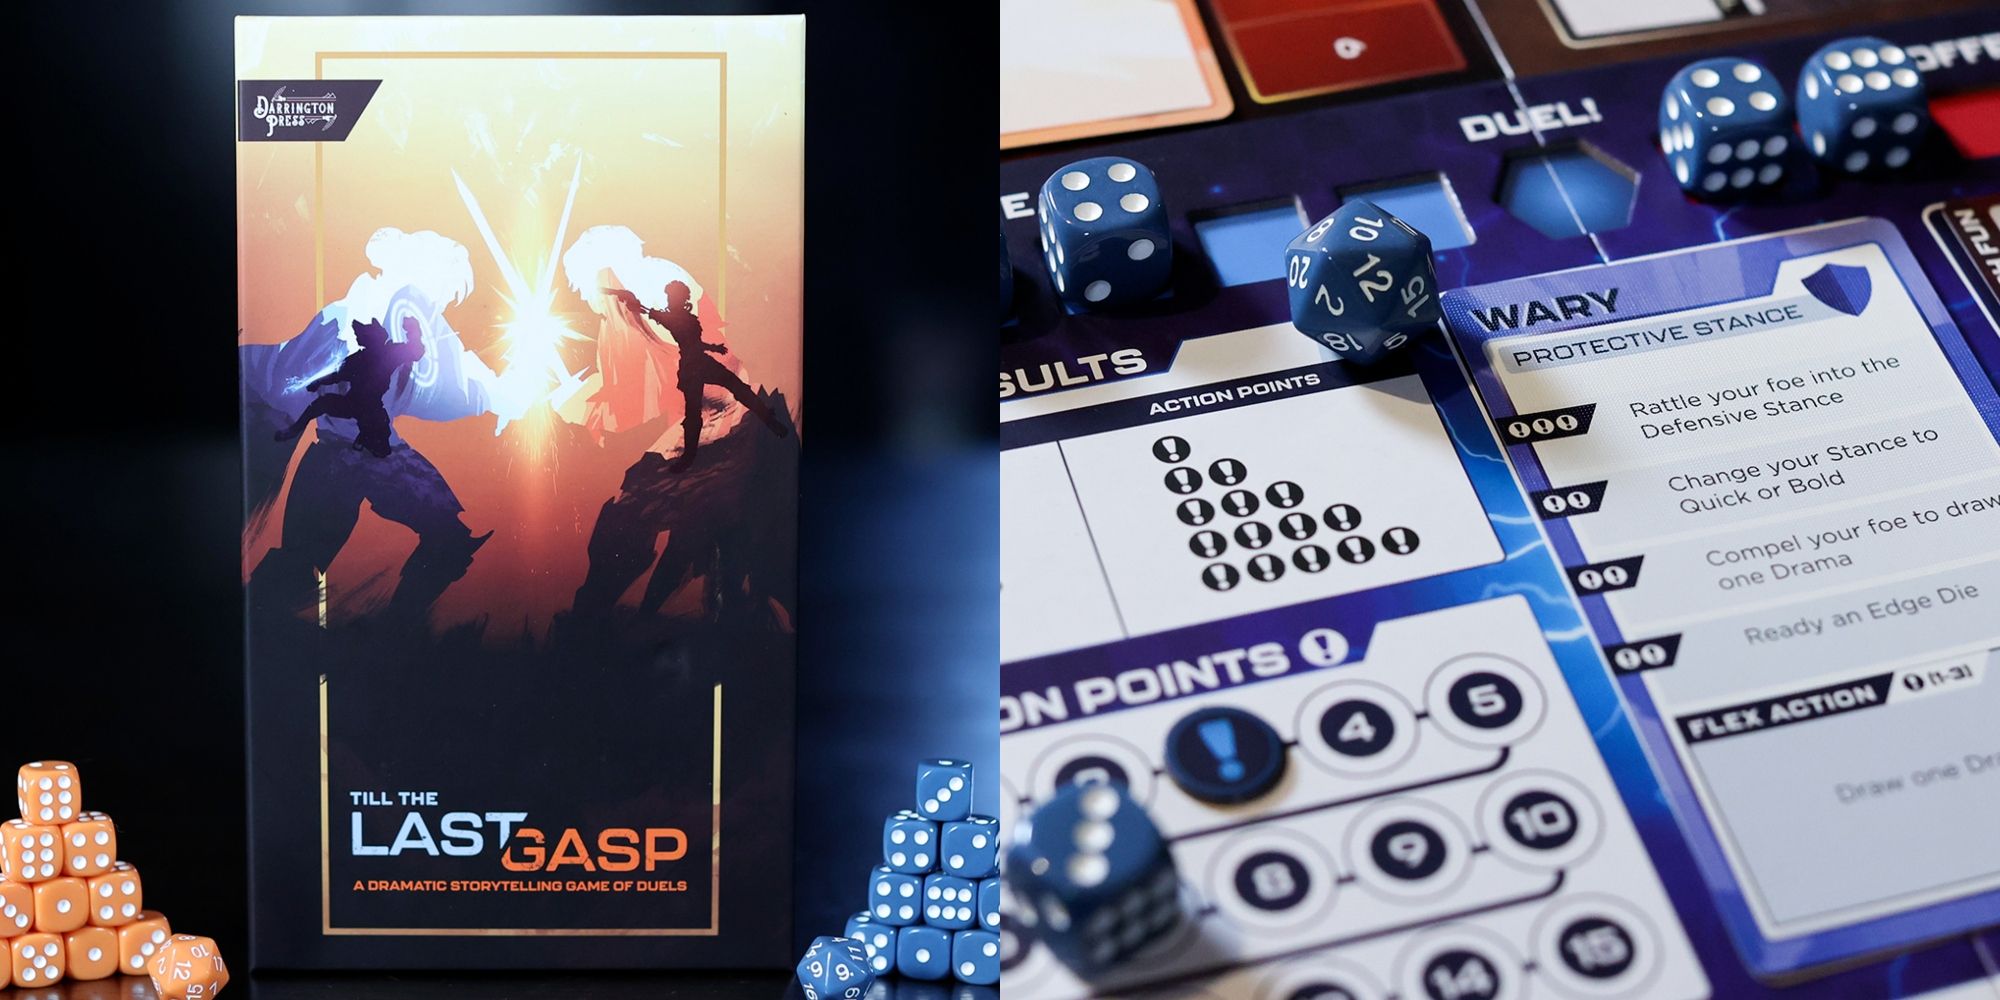 Till The Last Gasp box with blue and orange silhouettes duelling on the cover, beside the contents of the box including a card with stances listed on it